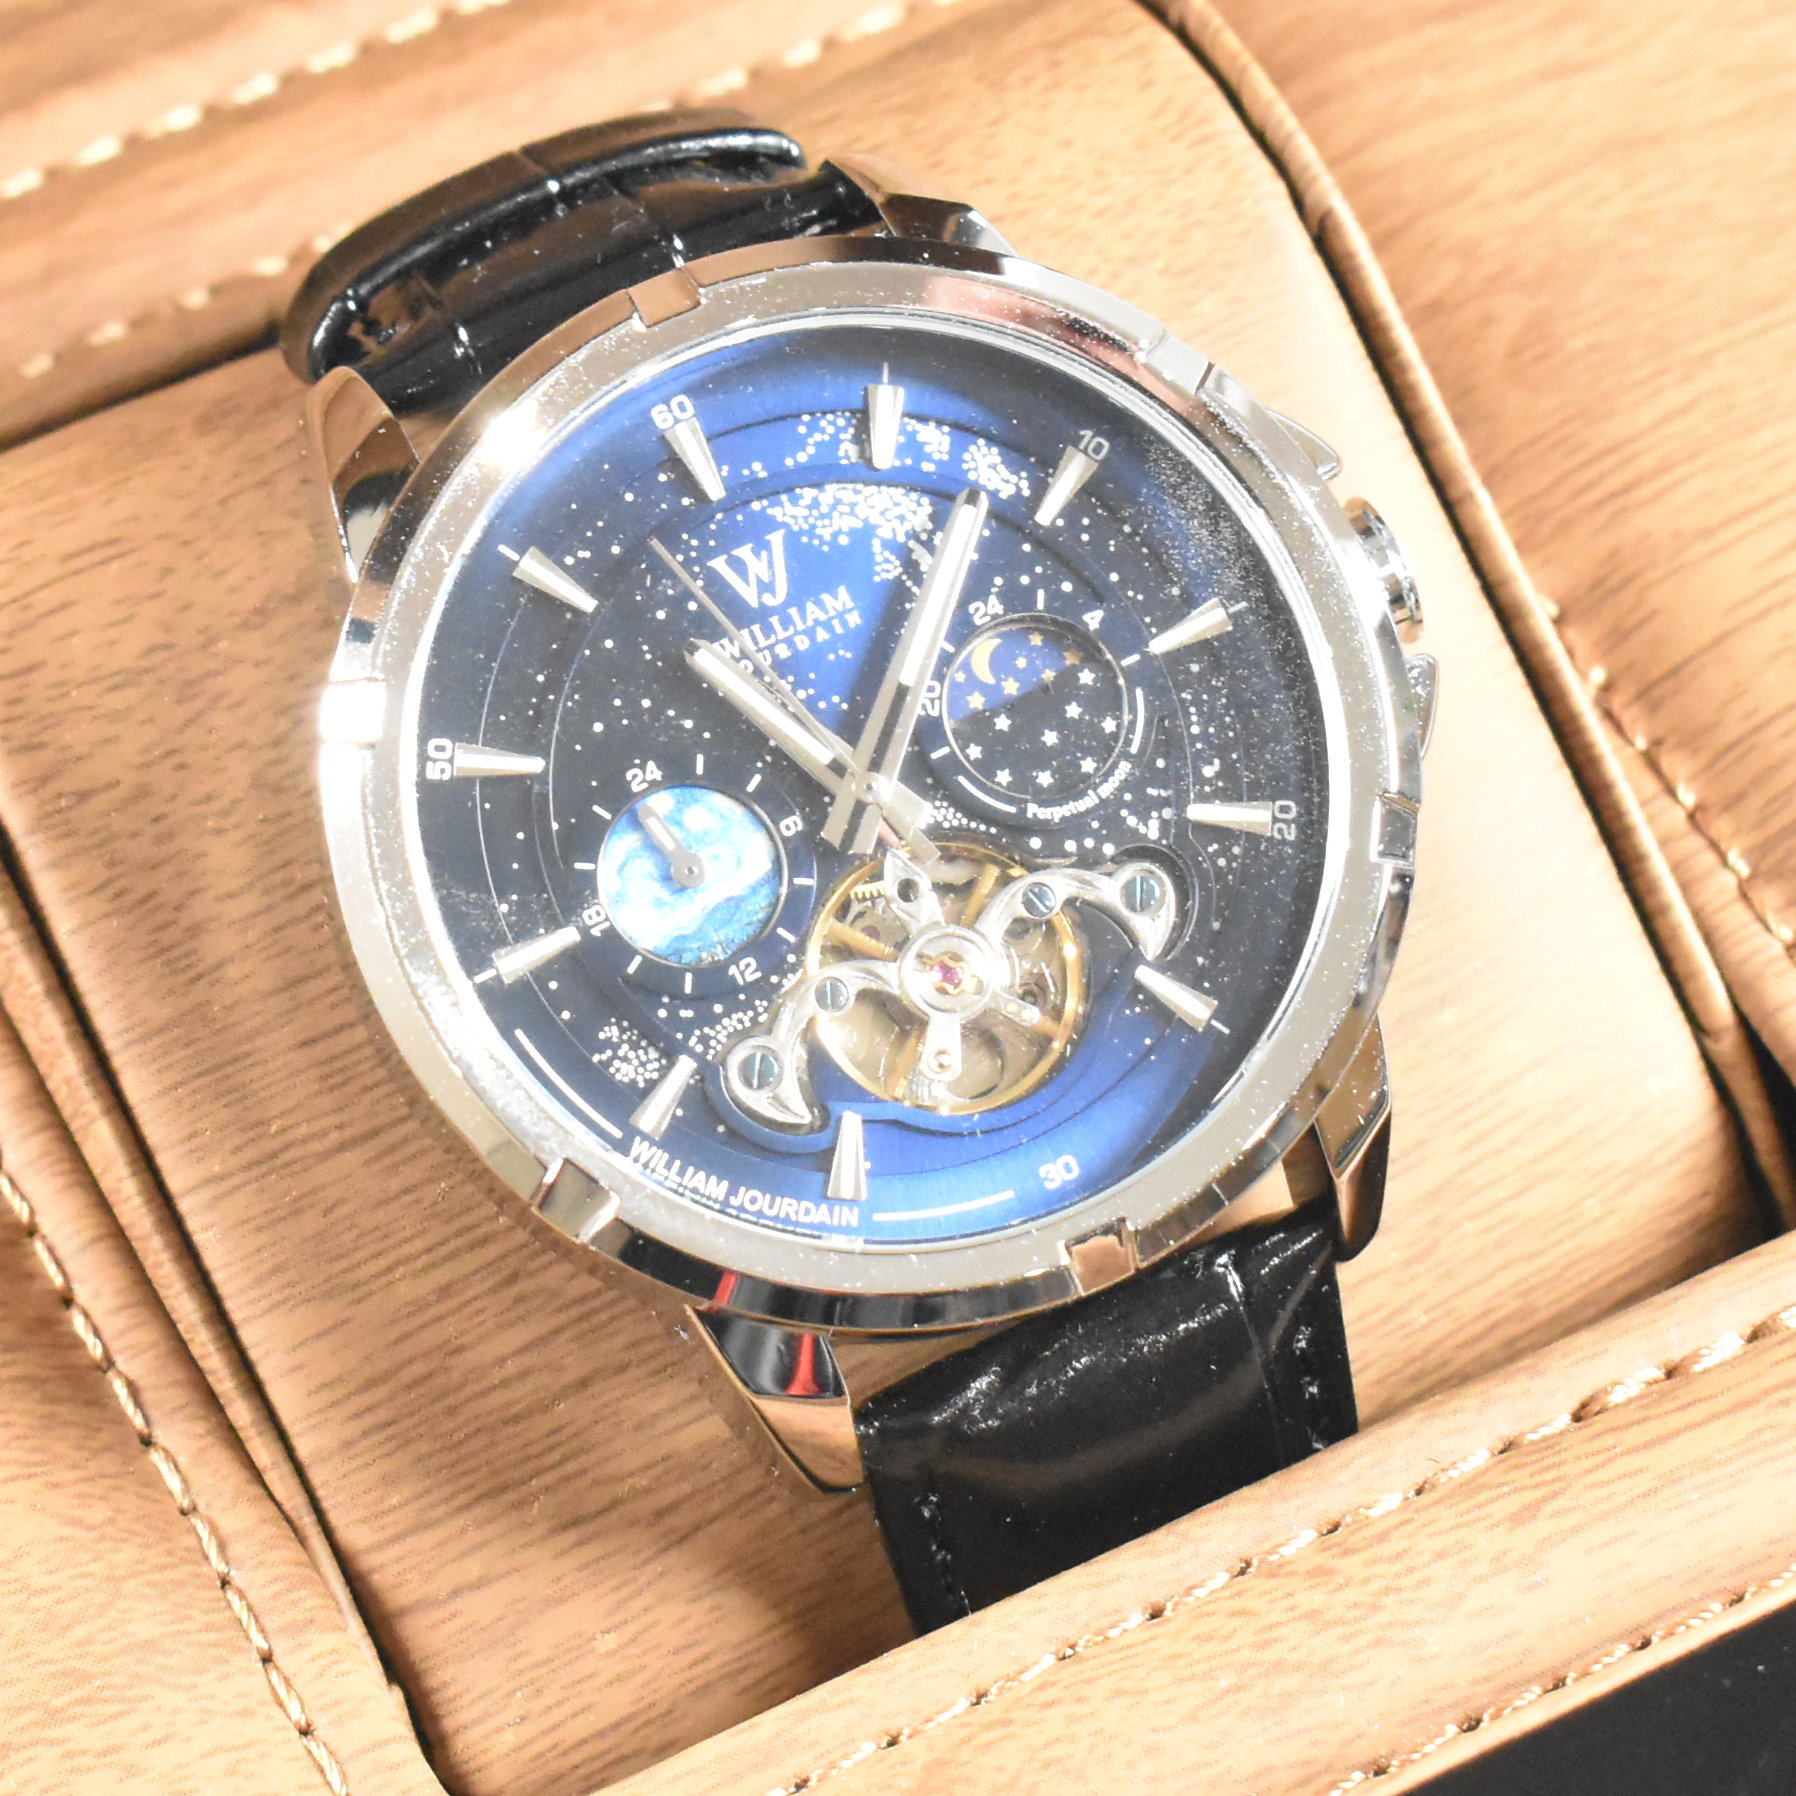 MENS CASED WILLIAM JOURDAIN AUTOMATIC WATCH - Image 3 of 7